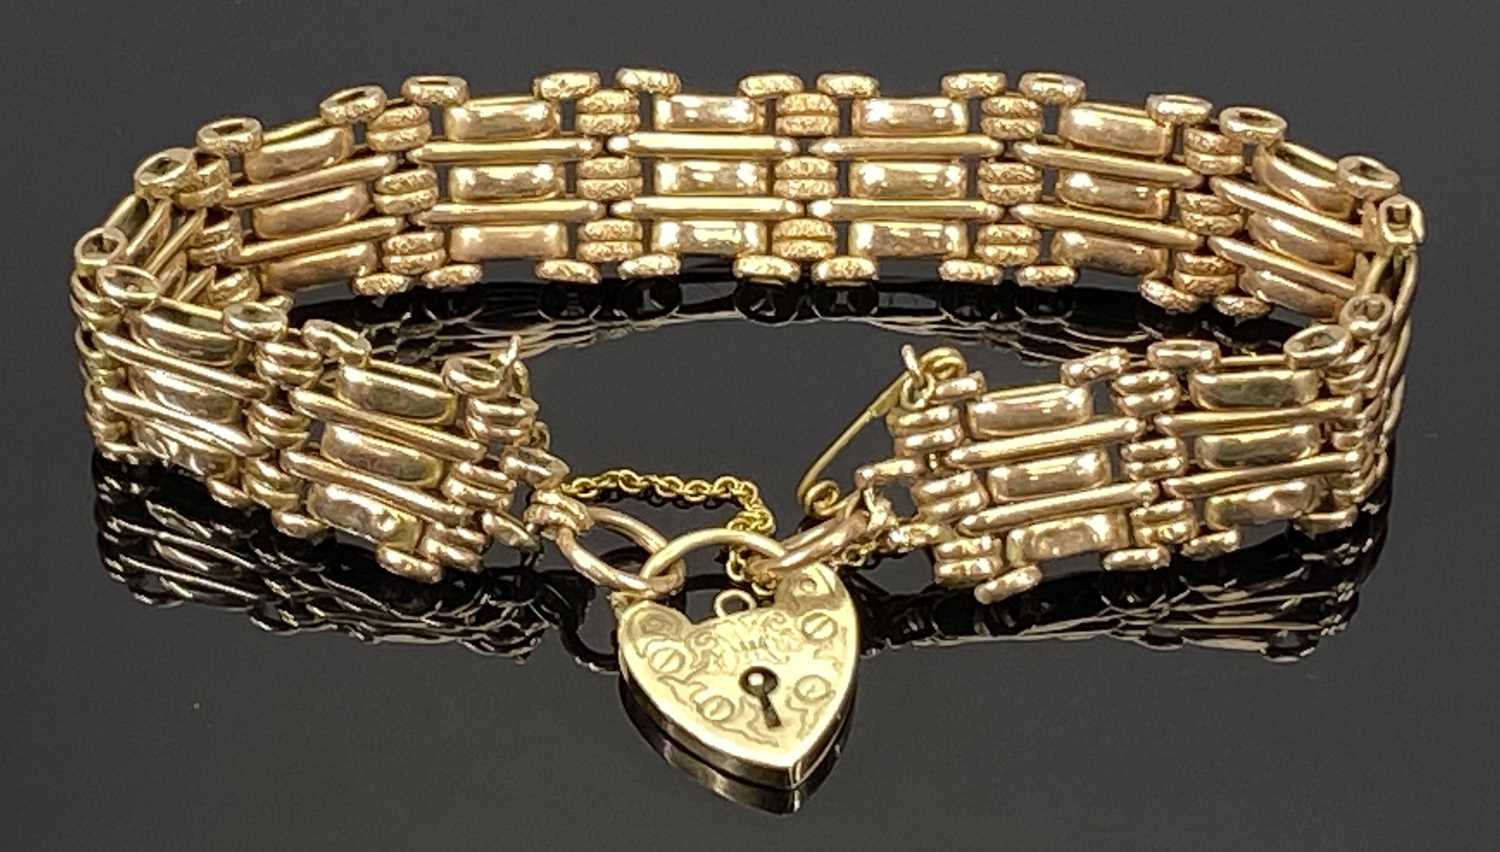 VINTAGE 9CT GOLD PART TEXTURED LINK BRACELET WITH PADLOCK CLASP & SAFETY CHAIN, circa 1900, 17.